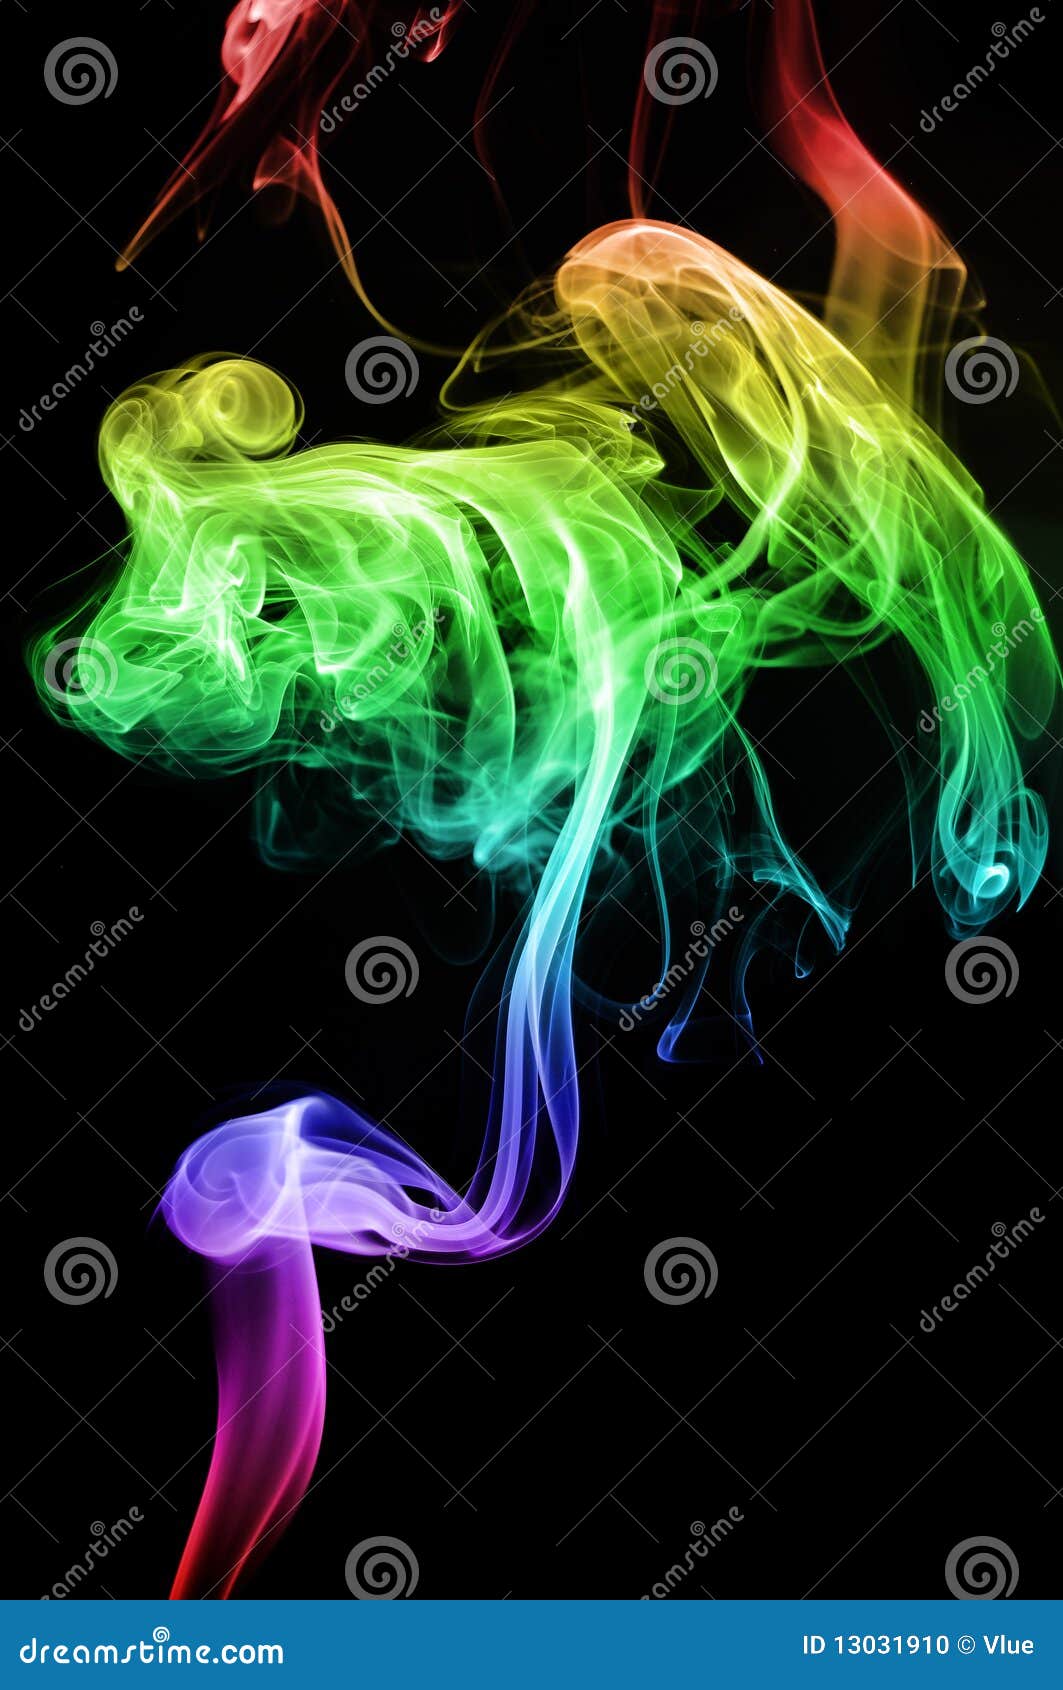 Rainbow Smoke. Smoke coming up from an incense stick over a black background with pretty rainbow multi colors on the fumes